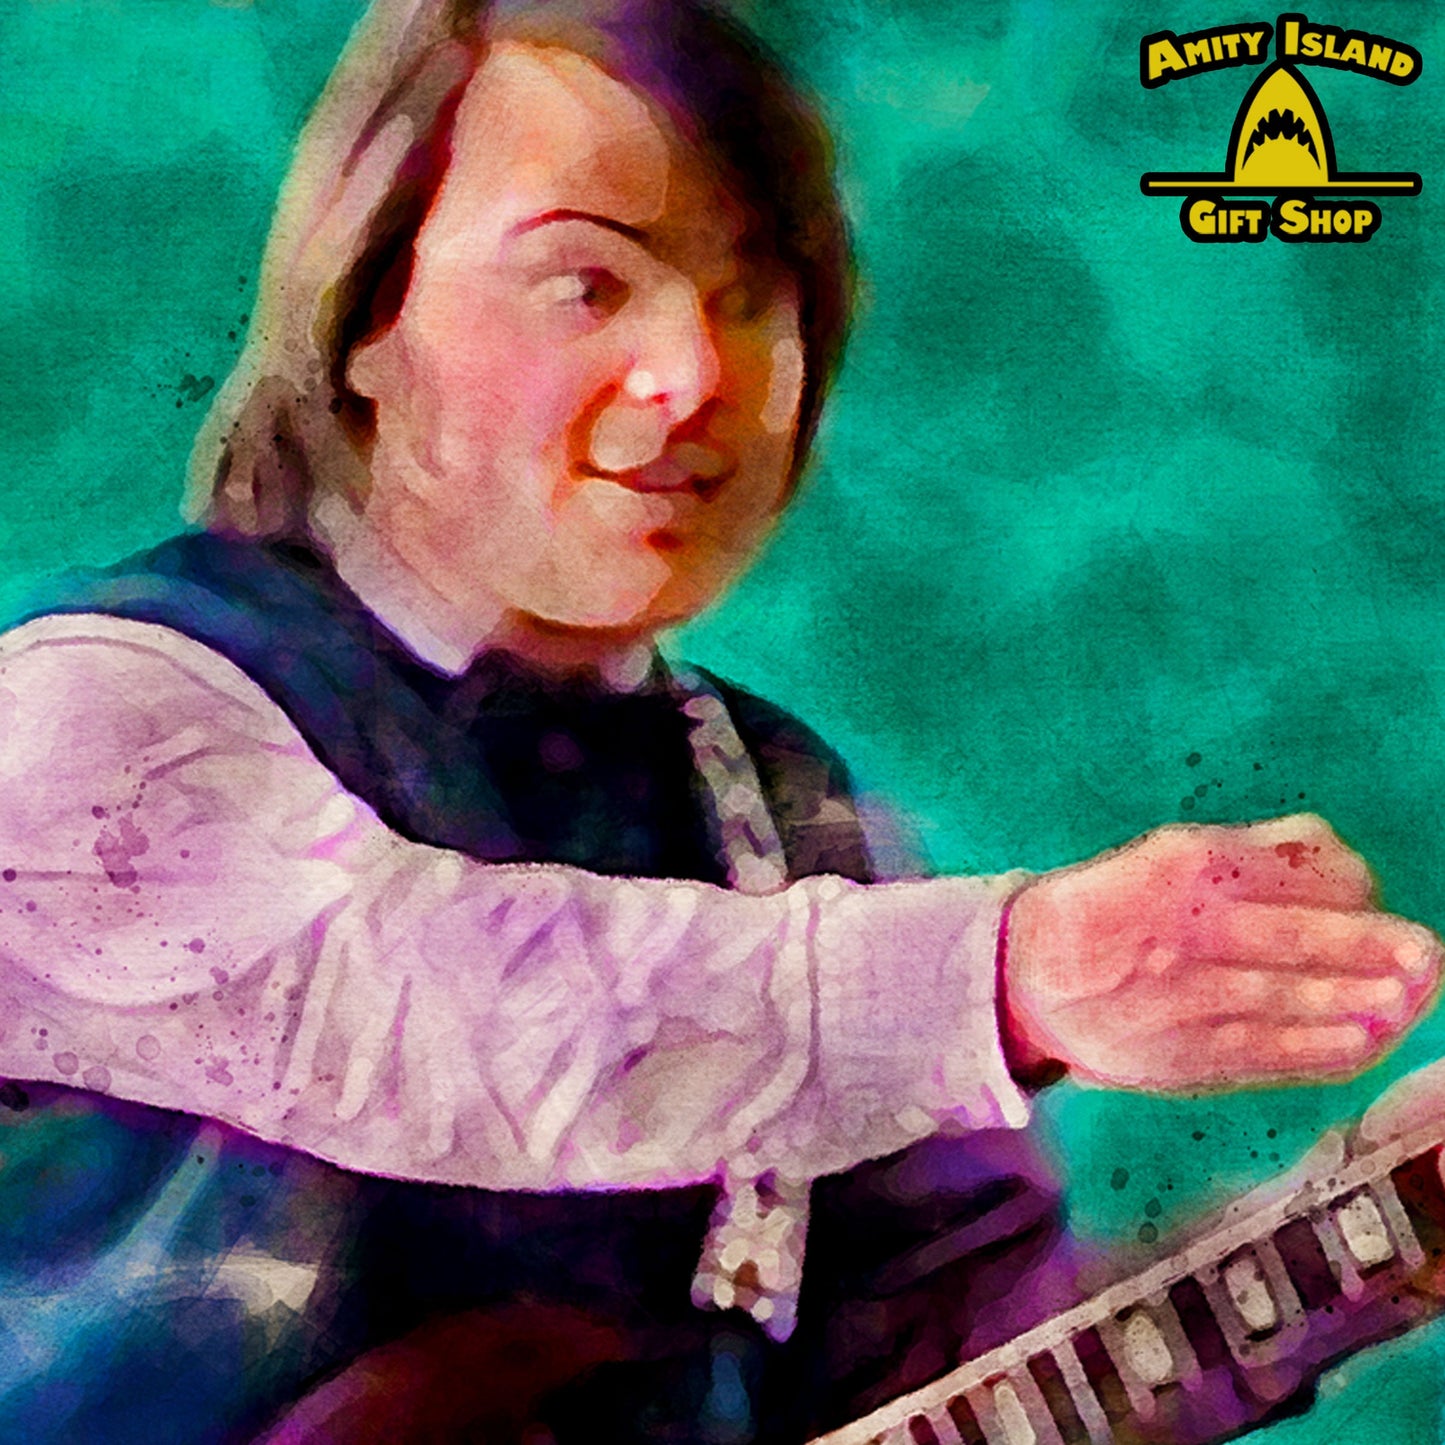 Nailed It - School of Rock Inspired Artwork - Jack Black - Music Class - Guitar Gift